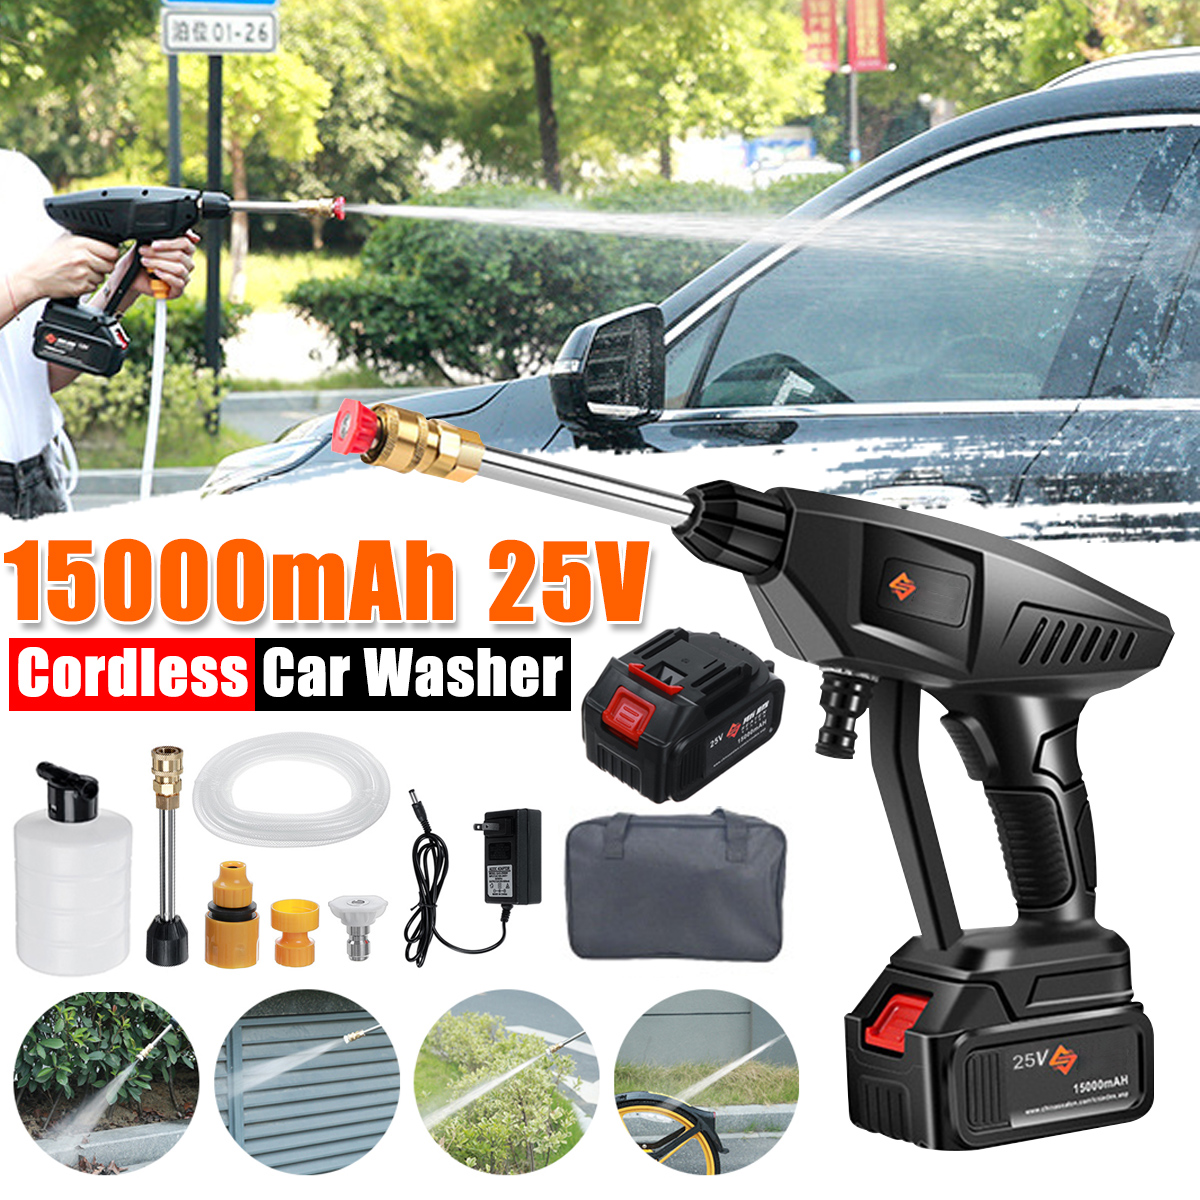 25V-30Bar-Cordless-High-Pressure-Car-Washer-Cleaner-for-Car-Cleaning-Wash-1794467-1